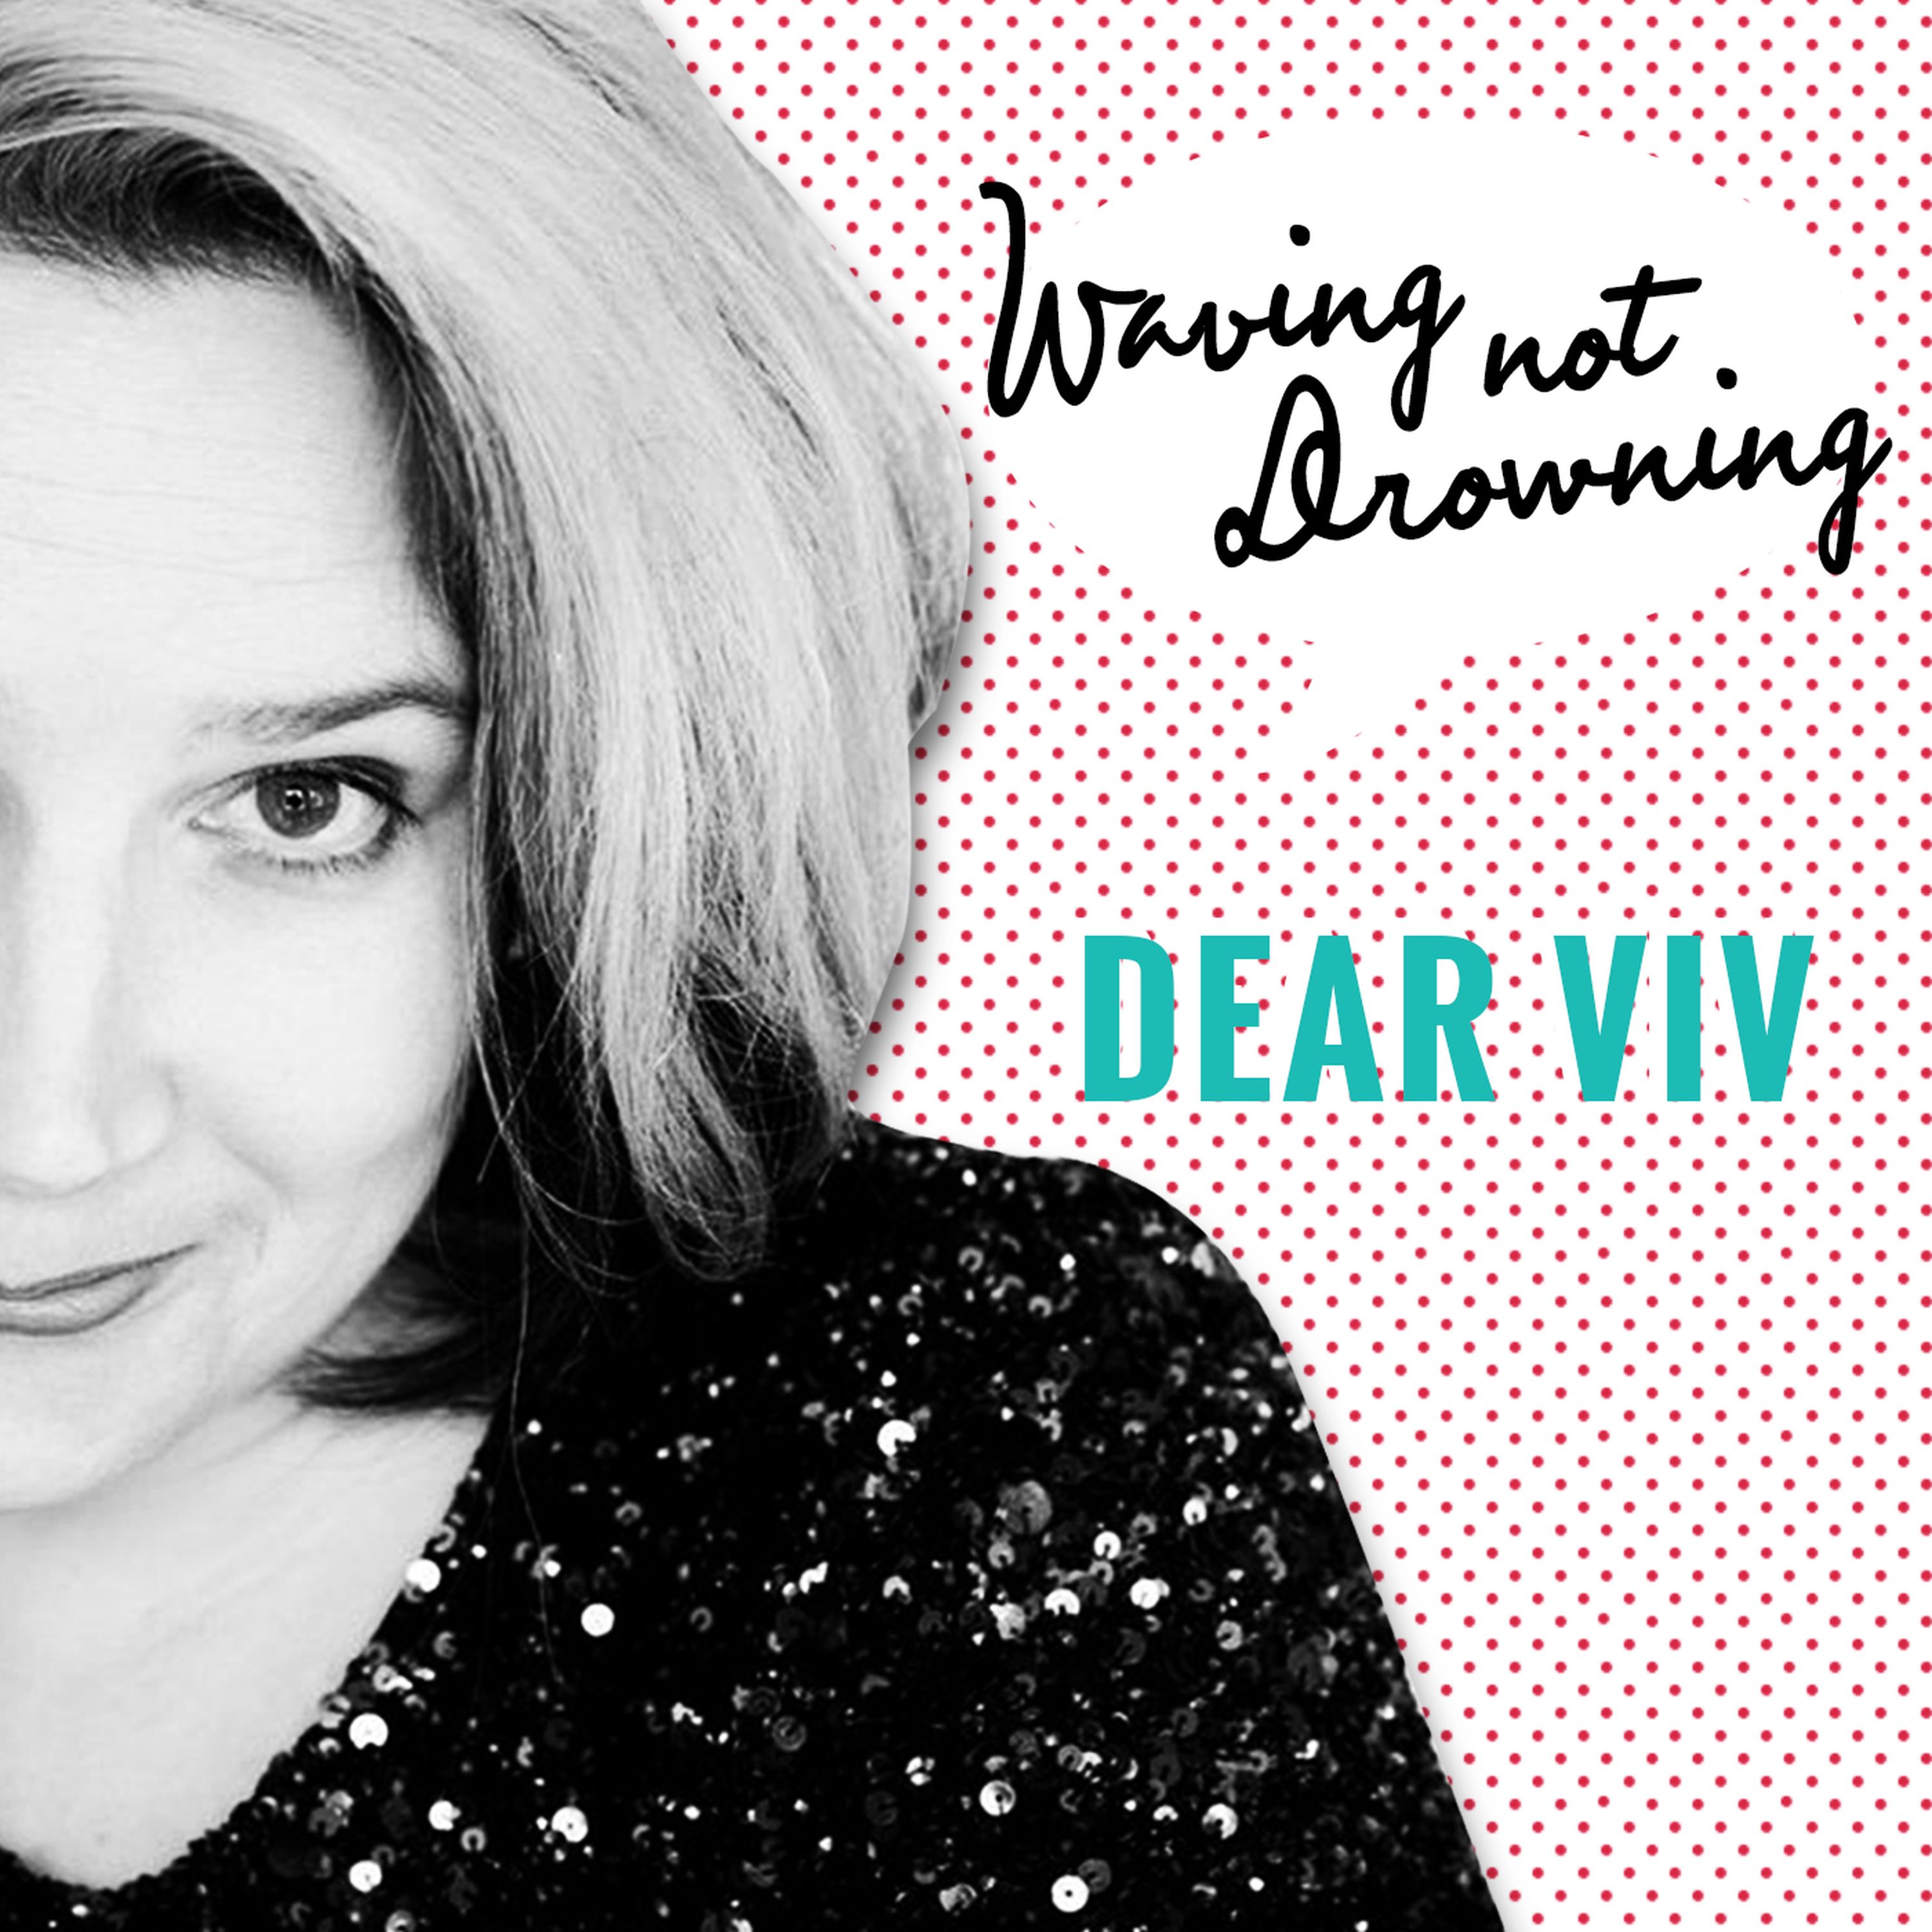 Dear Viv: My retired parents are getting a divorce